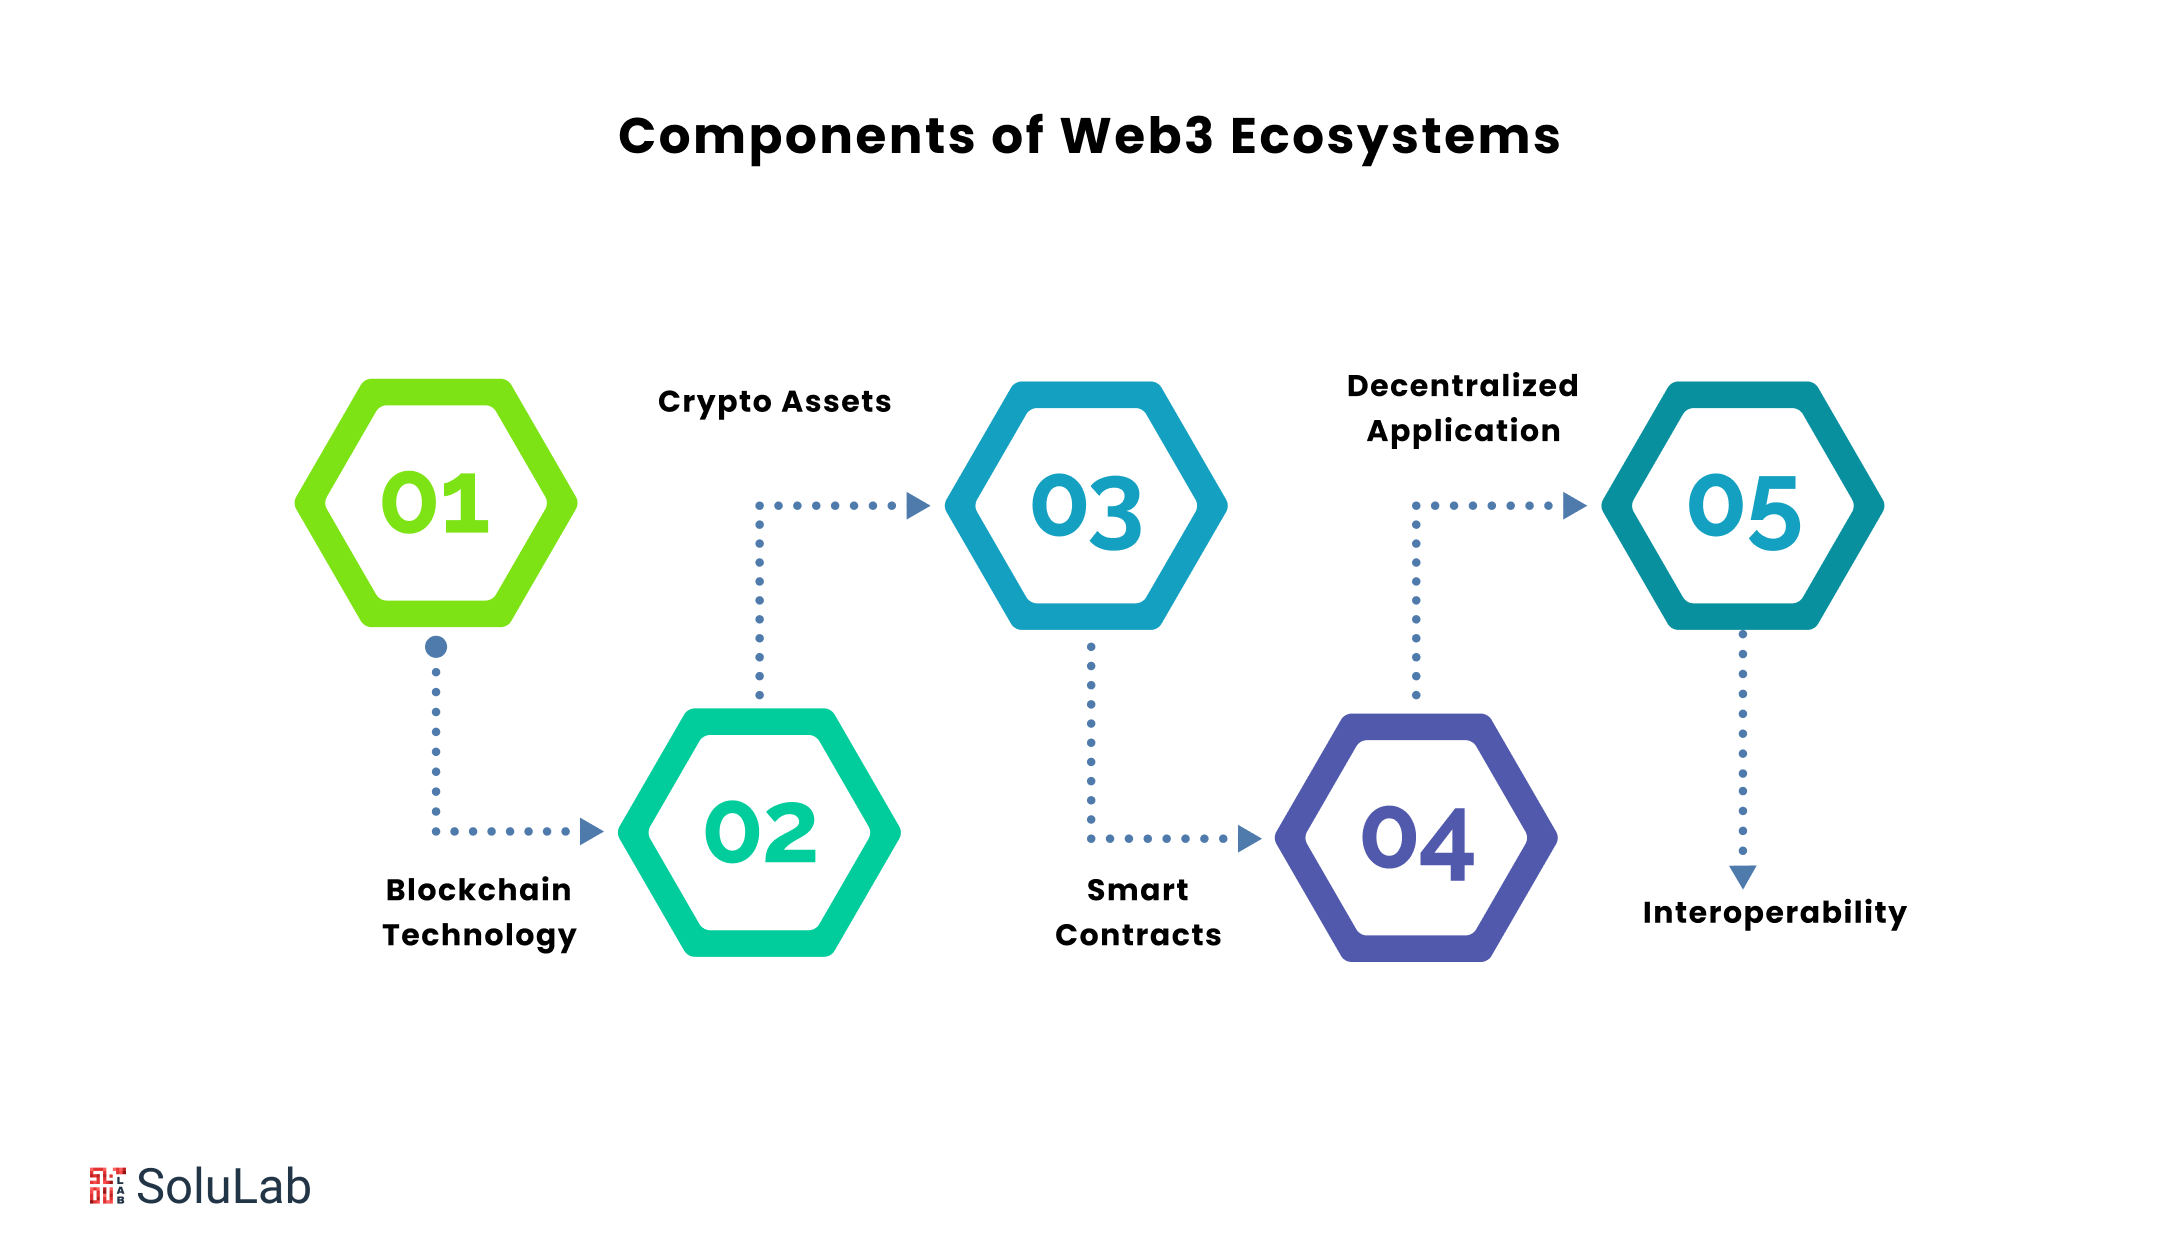 Components of Web3 Ecosystems